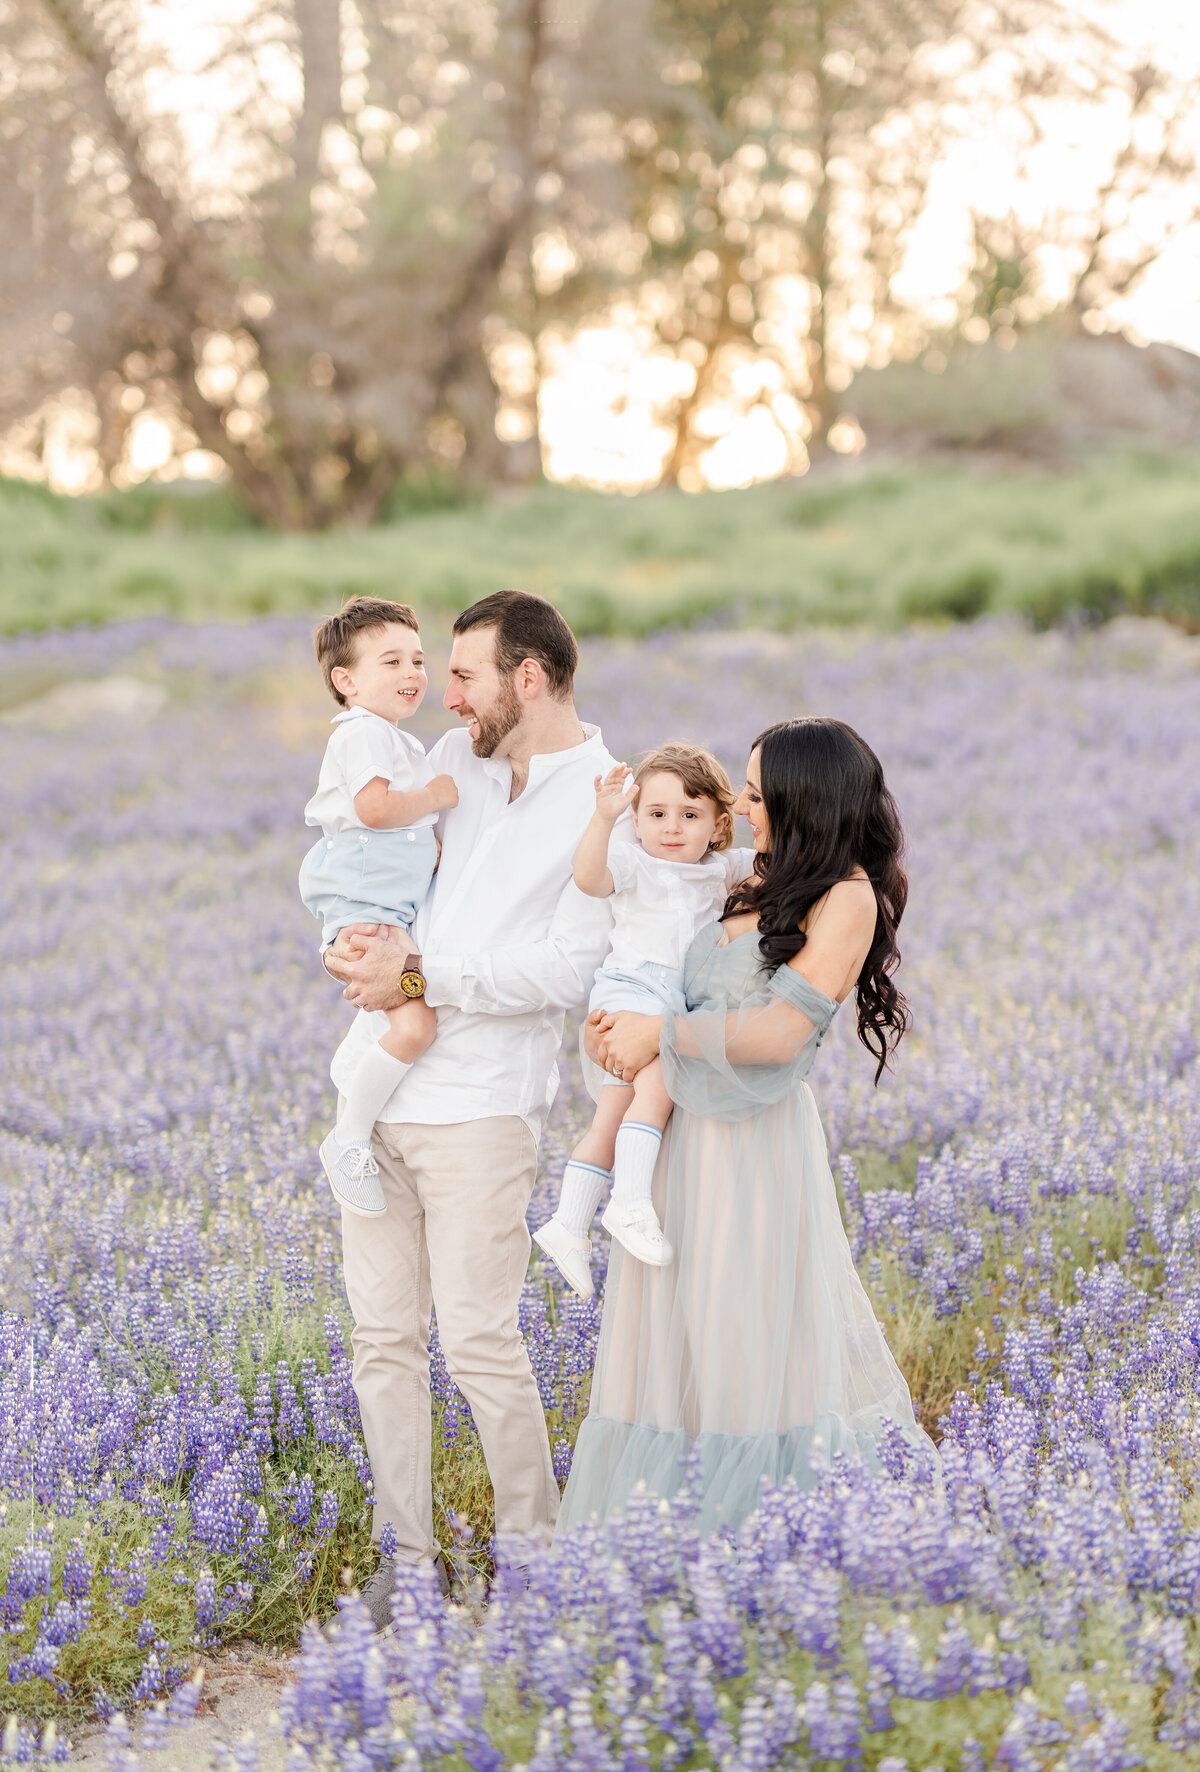 A family session photographed by Bay Area Photographer, Light Livin Photography shows a family standing together in a field of lupine flowers..